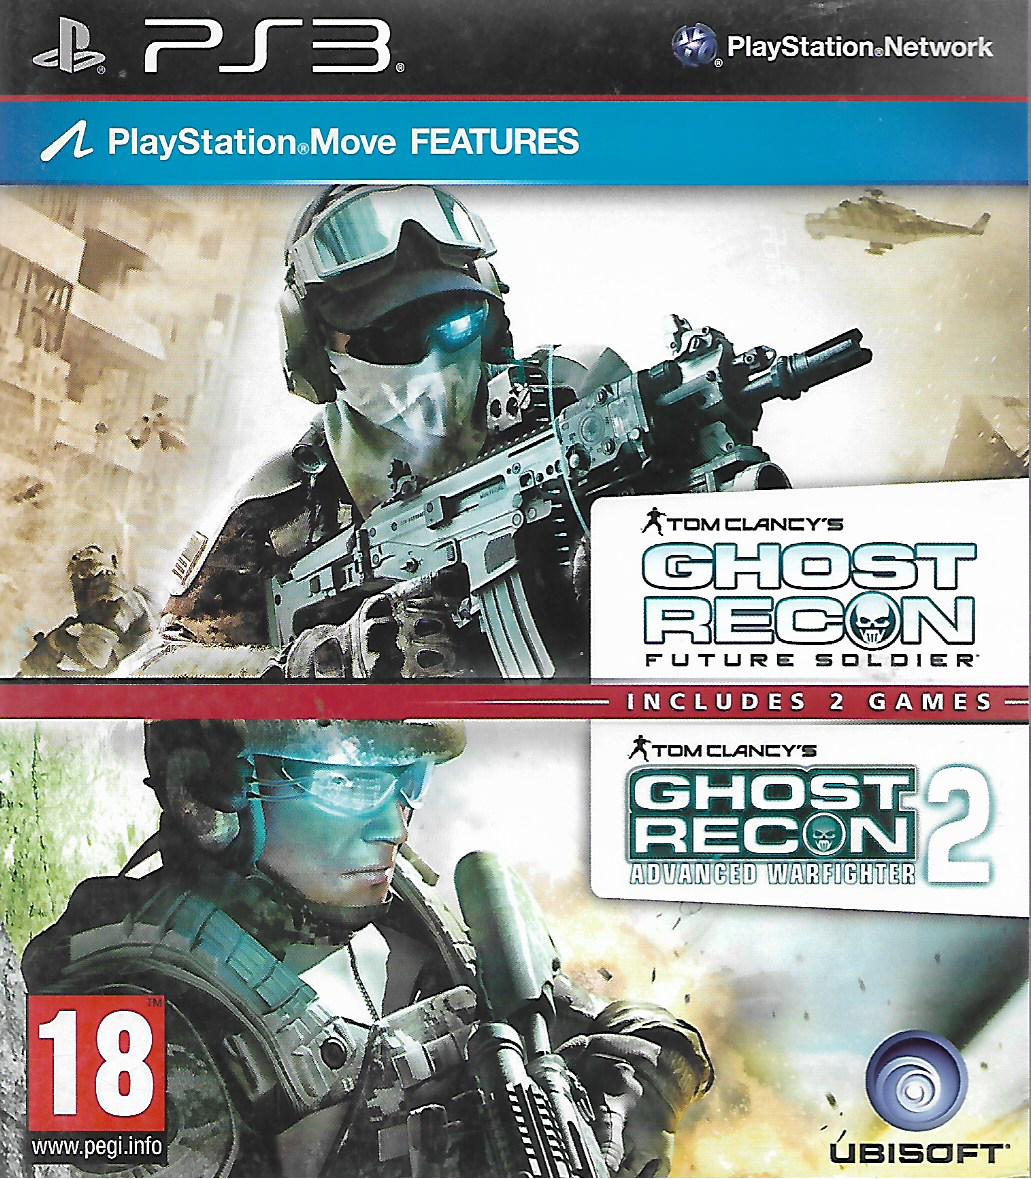 TOM CLANCY'S GHOST RECON - TWO GAMES PACK (PS3 - bazar)